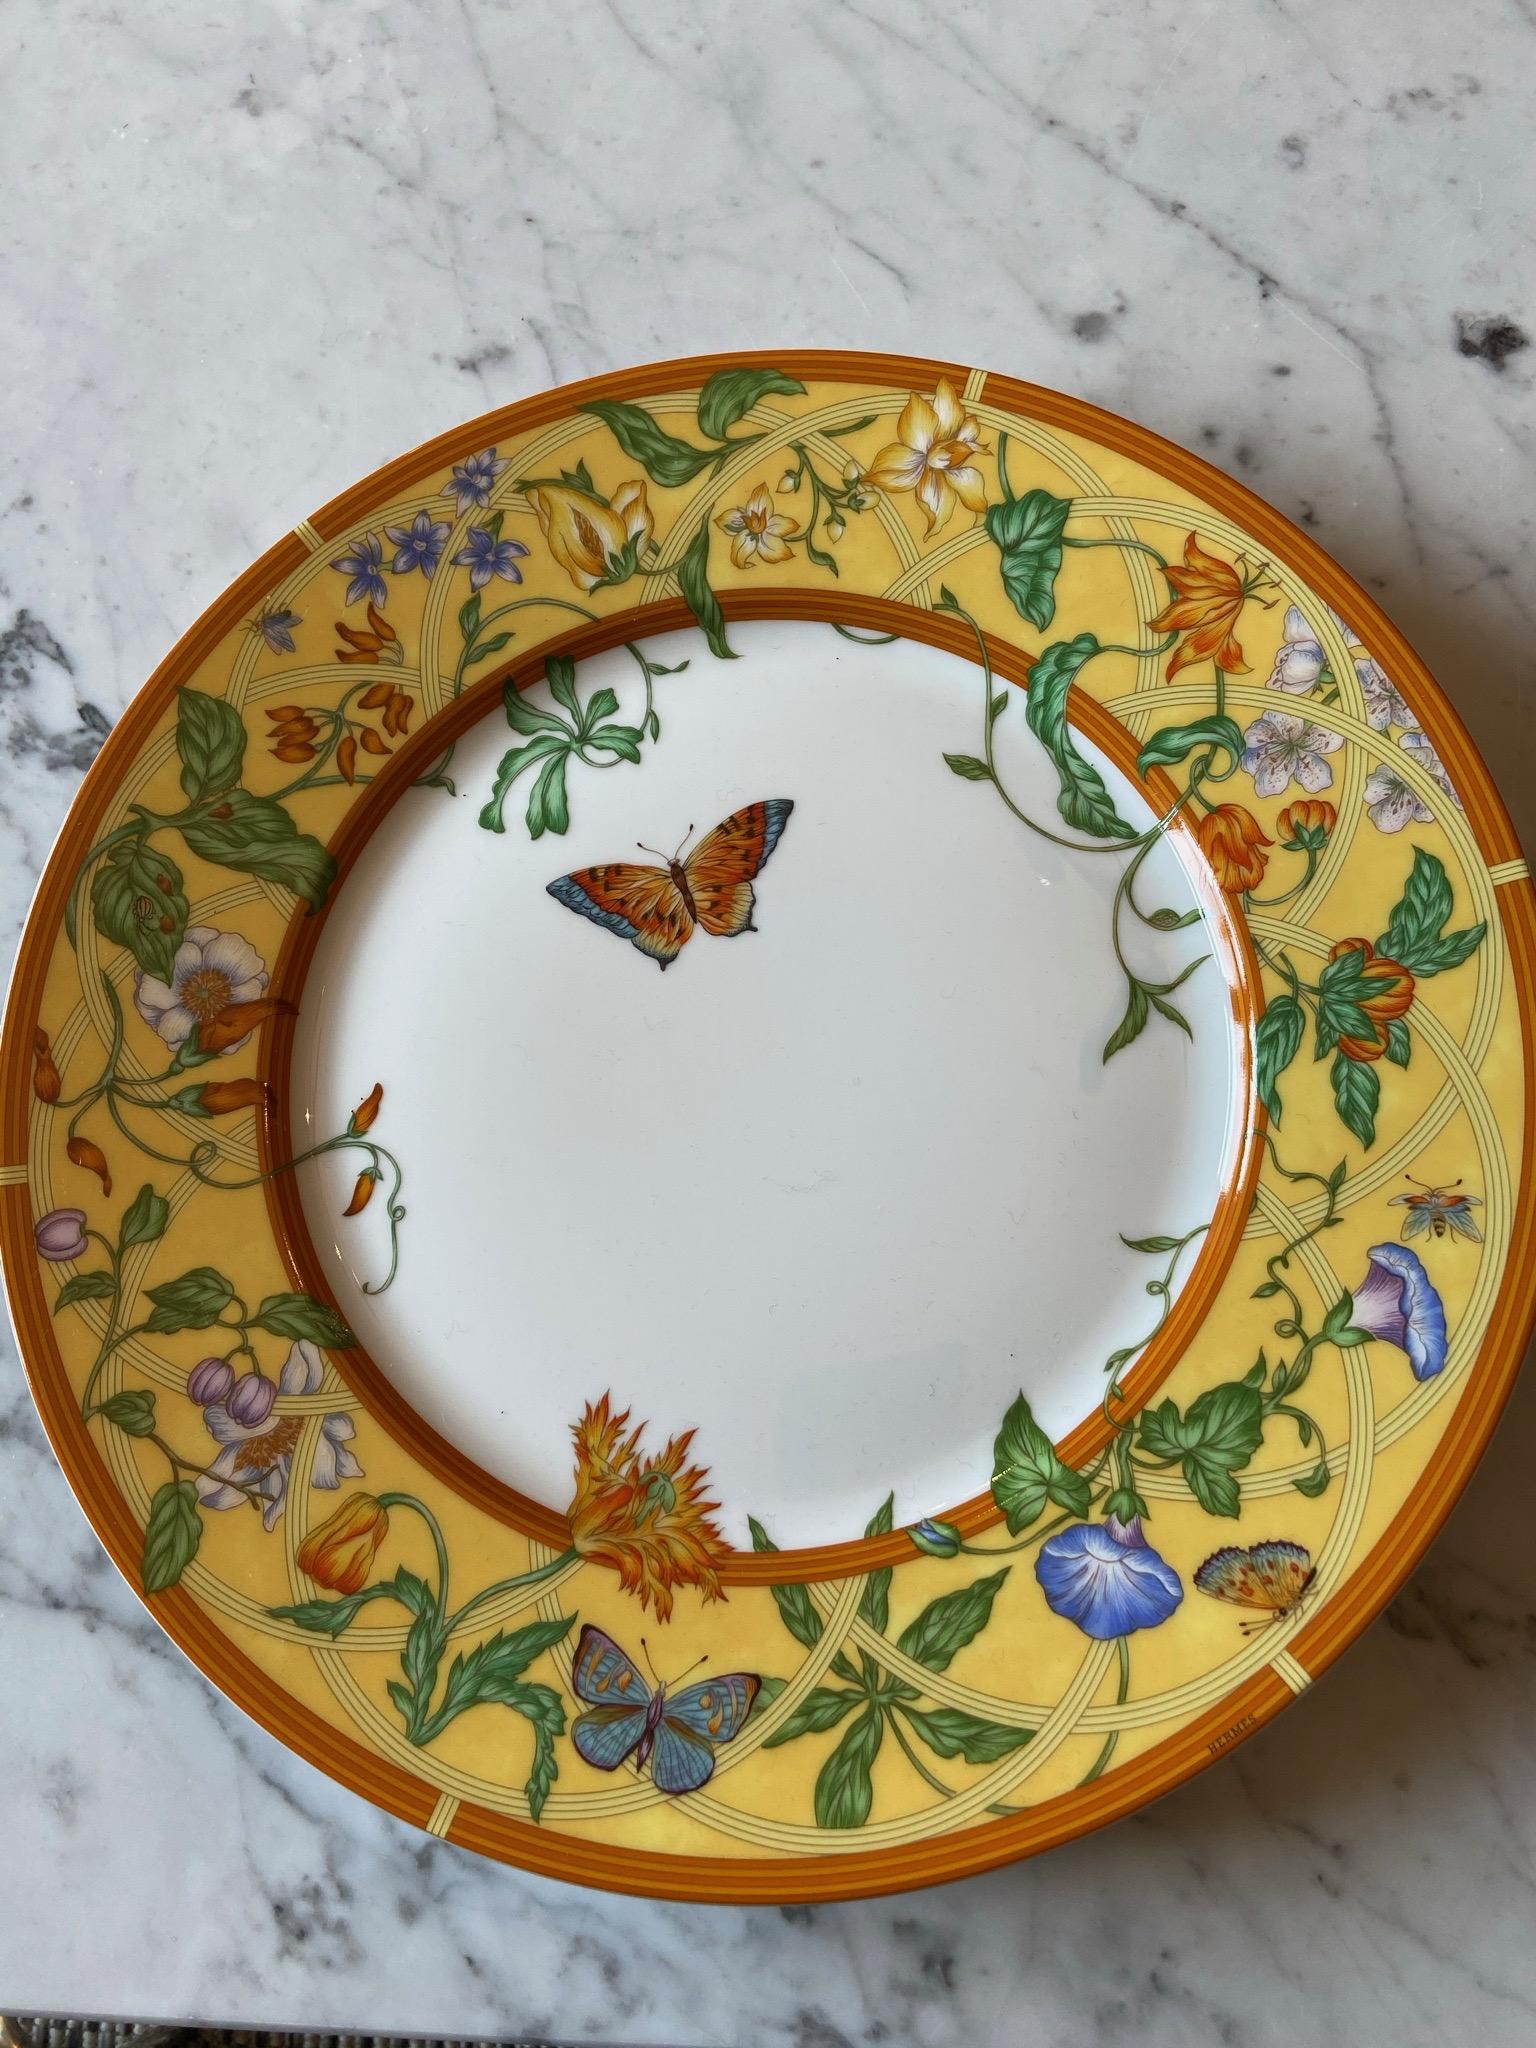 Cake/ dessert plate from Siesta Collection Hermès Paris, made with fine porcelain from Limoges France. The plate is designed with beautiful floral decors, in the yellow and orange tones. It is signed on the back. The plate is new and comes with its